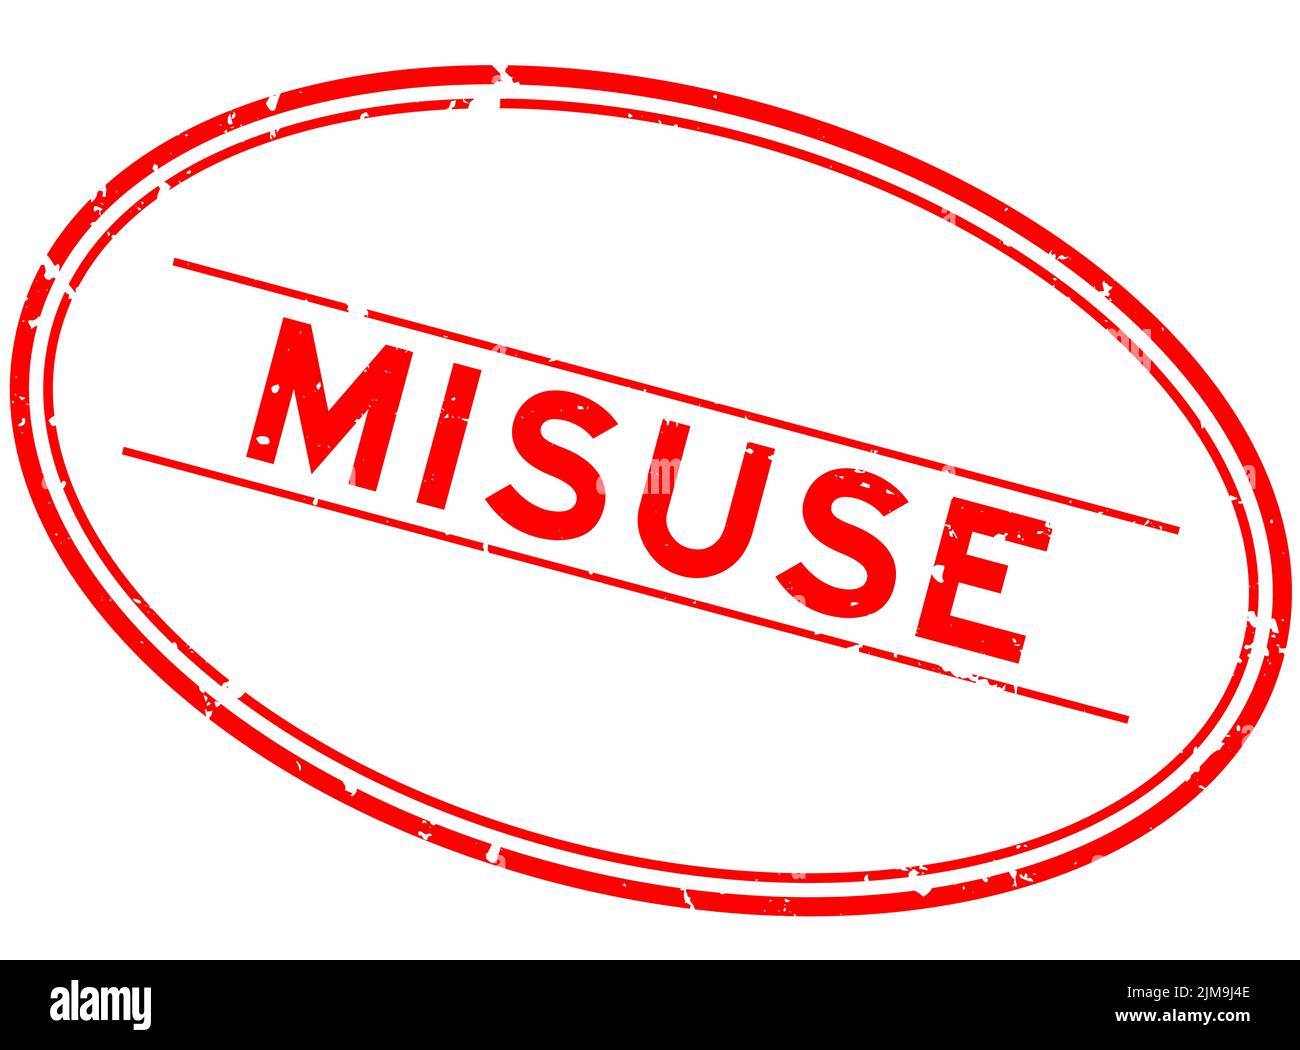 Grunge red misuse word oval rubber seal stamp on white background Stock Vector